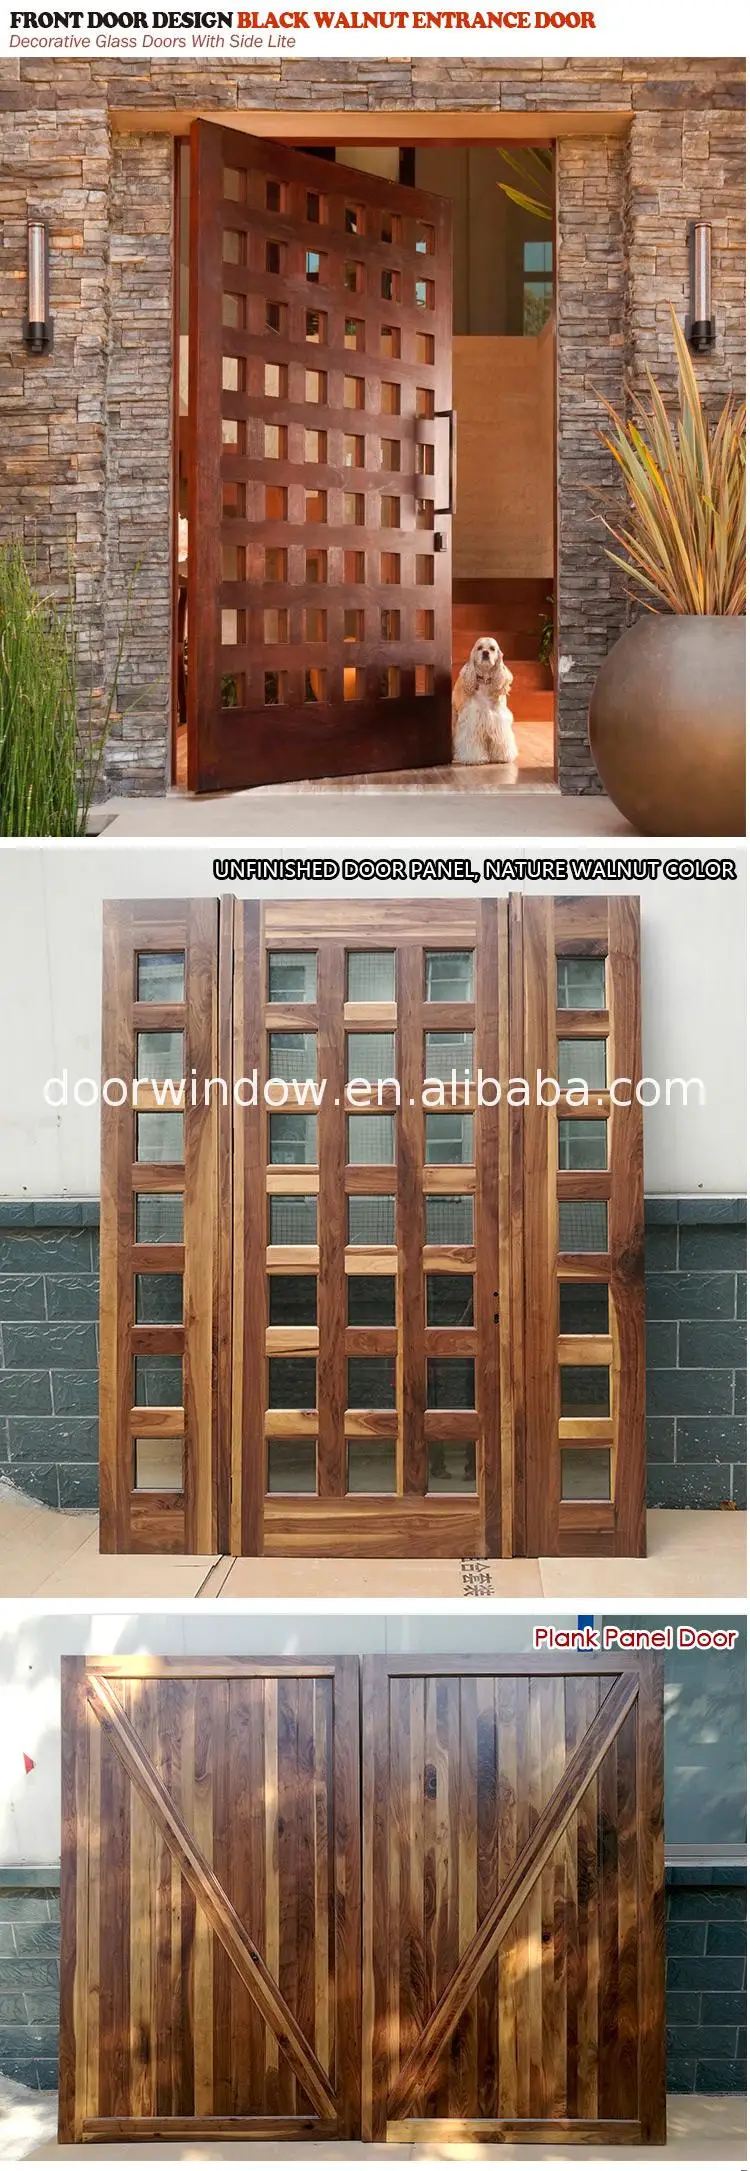 High quality single wood doors pictures simpson simple wooden door designs for home